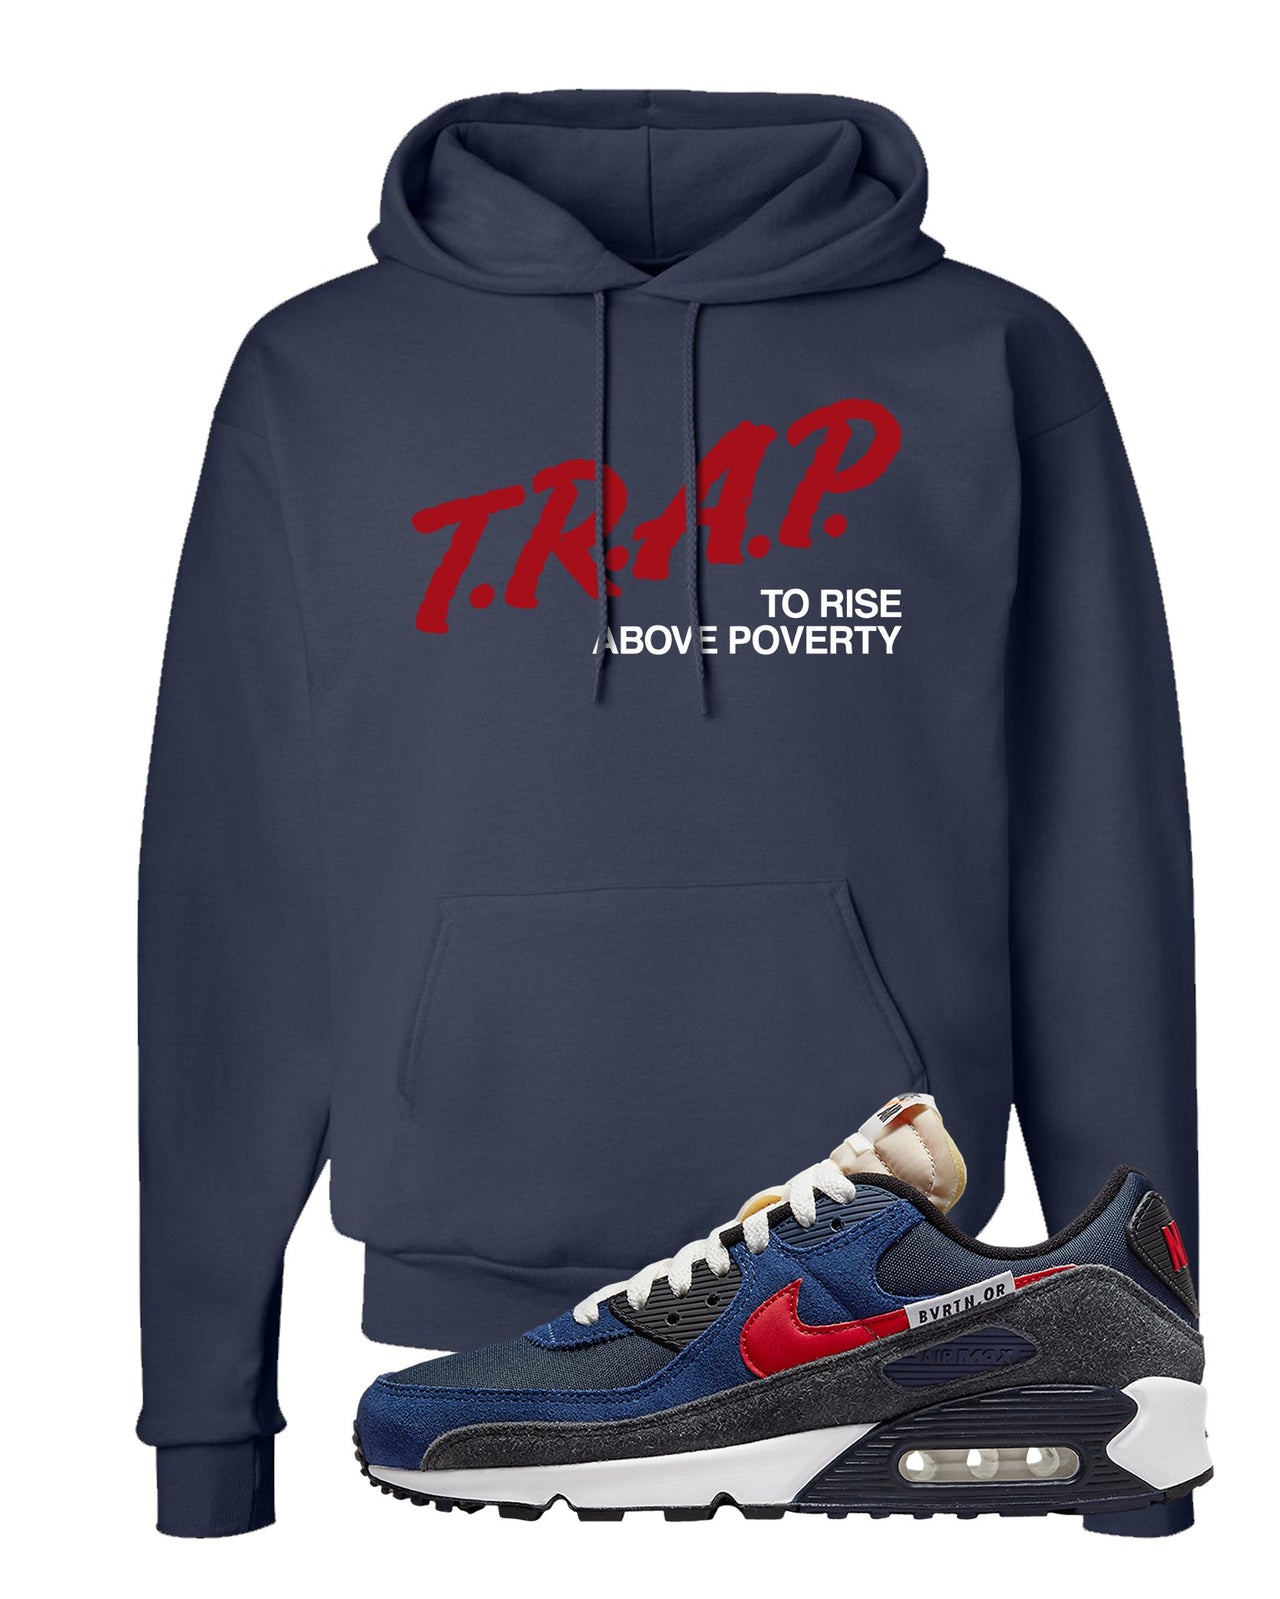 AMRC 90s Hoodie | Trap To Rise Above Poverty, Navy Blue